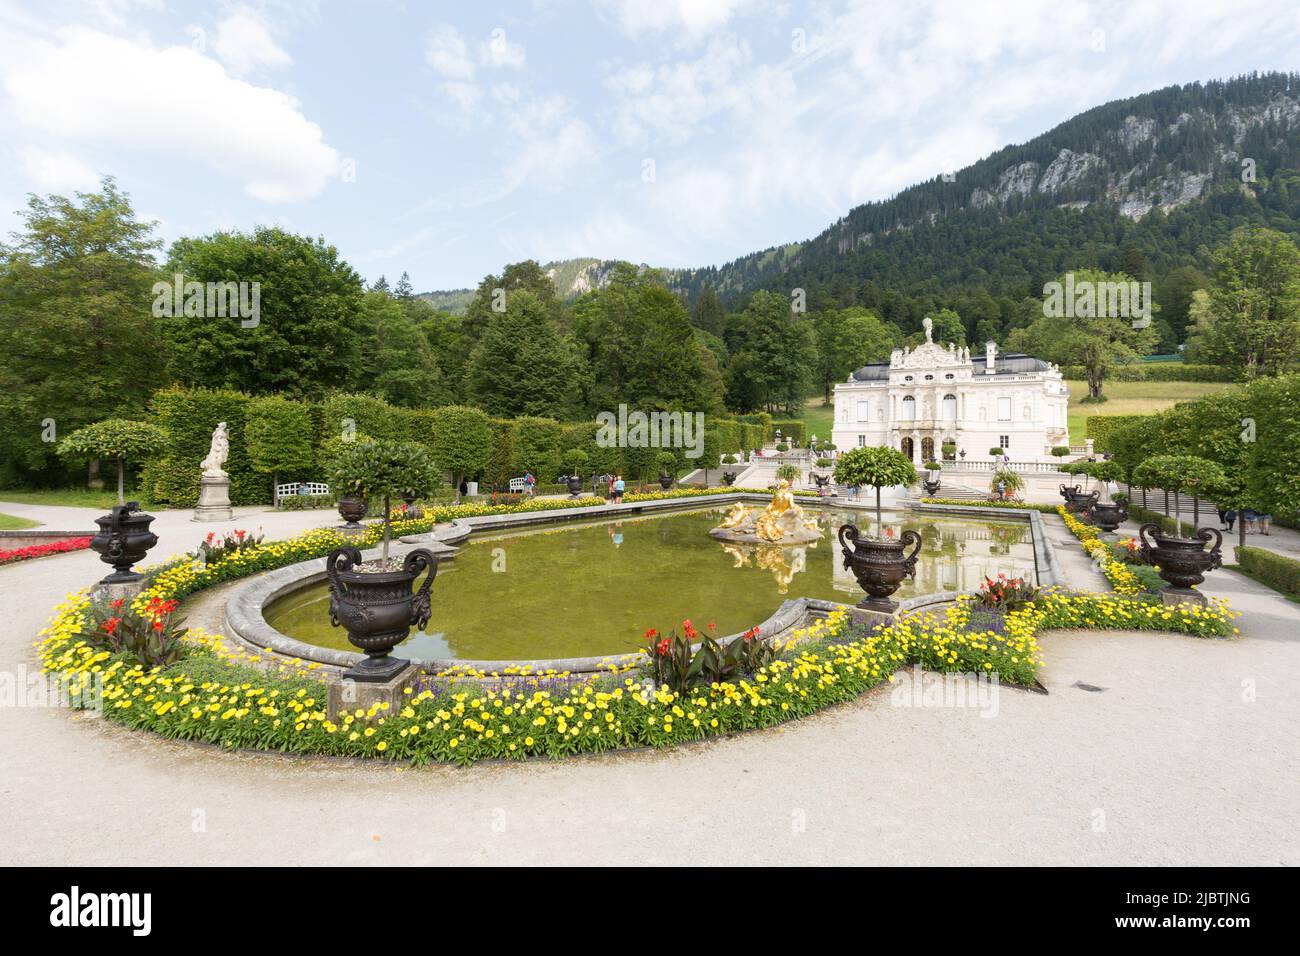 Linderhof, Germany - Aug 21, 2021: View on pond in front of Linderhof Palace (Schloss Linderhof). With mountain in the background. Stock Photo